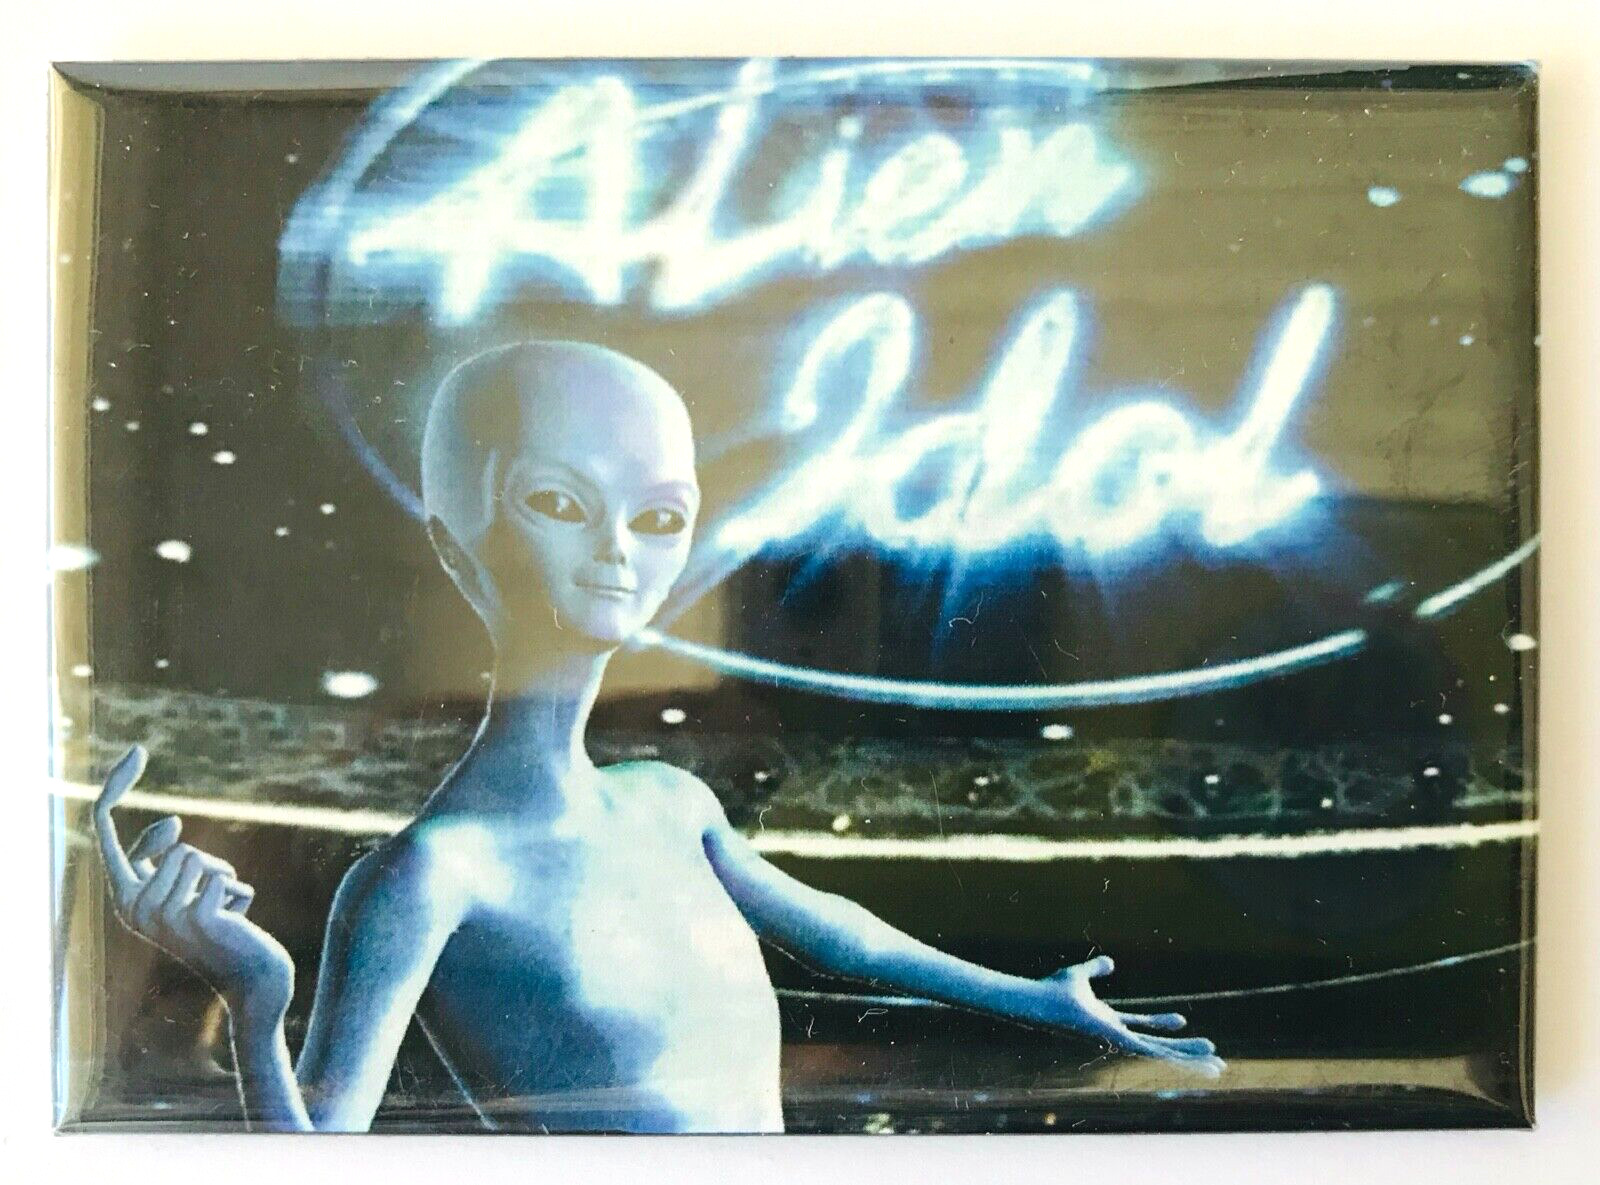 Alien Idol Novelty Refrigerator Magnet KC Productions AL-M105 Made in USA